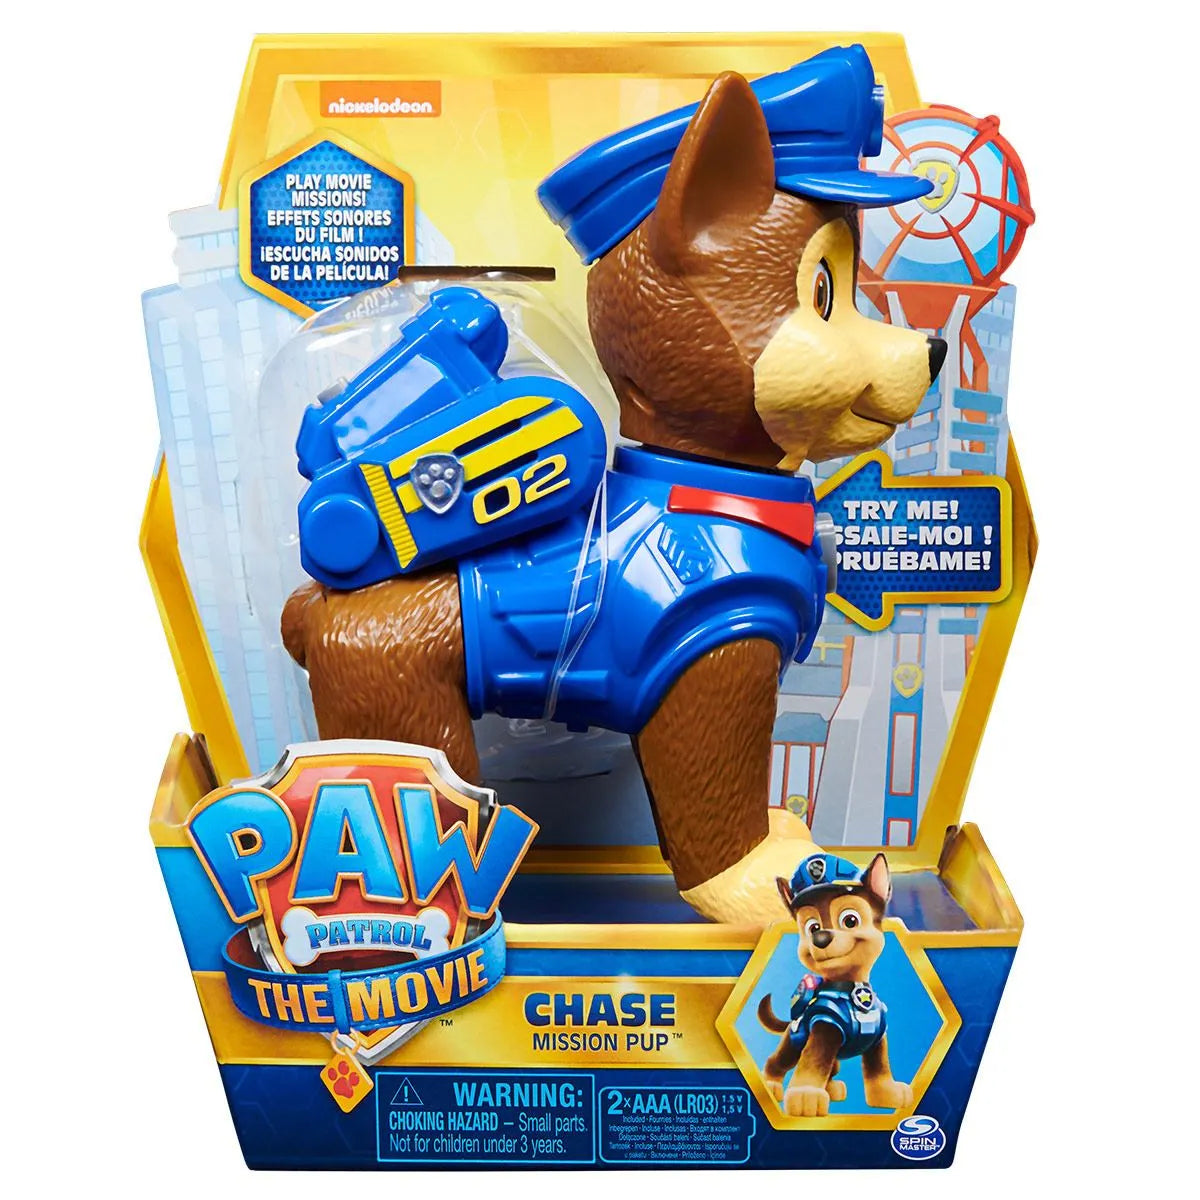 Paw Patrol Movie Interactive Fig. Assorted